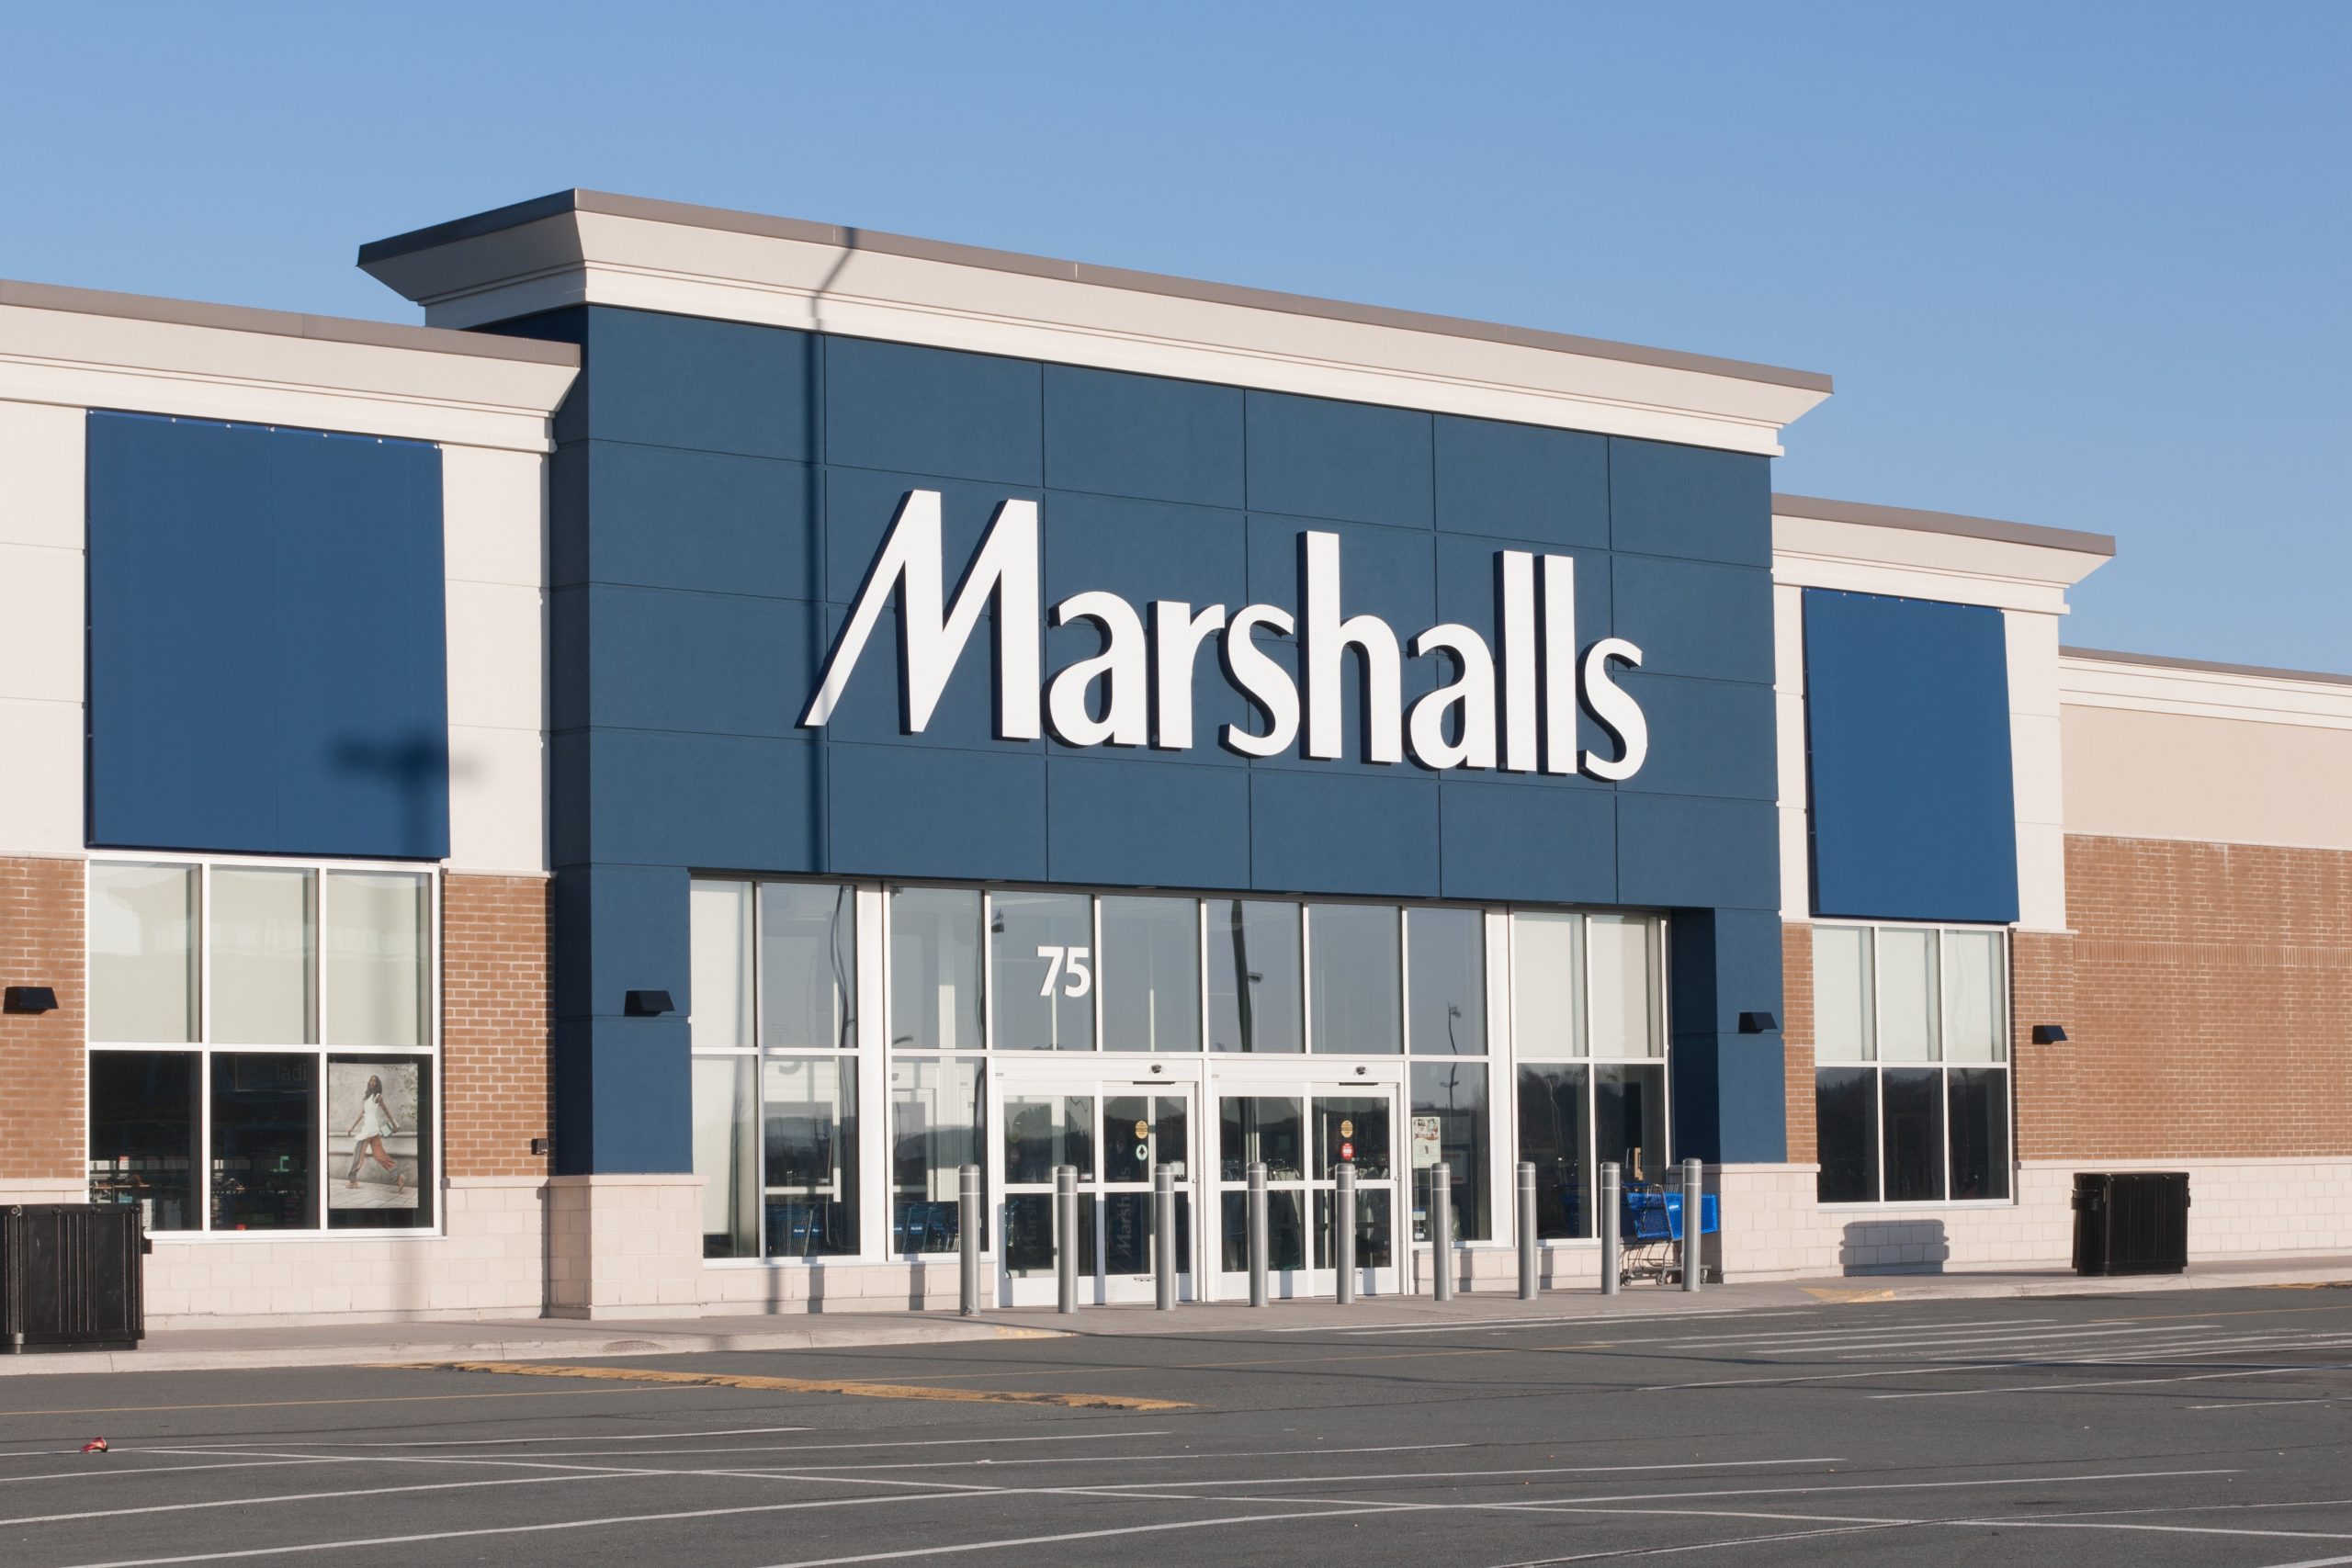 exterior of a Marshalls store